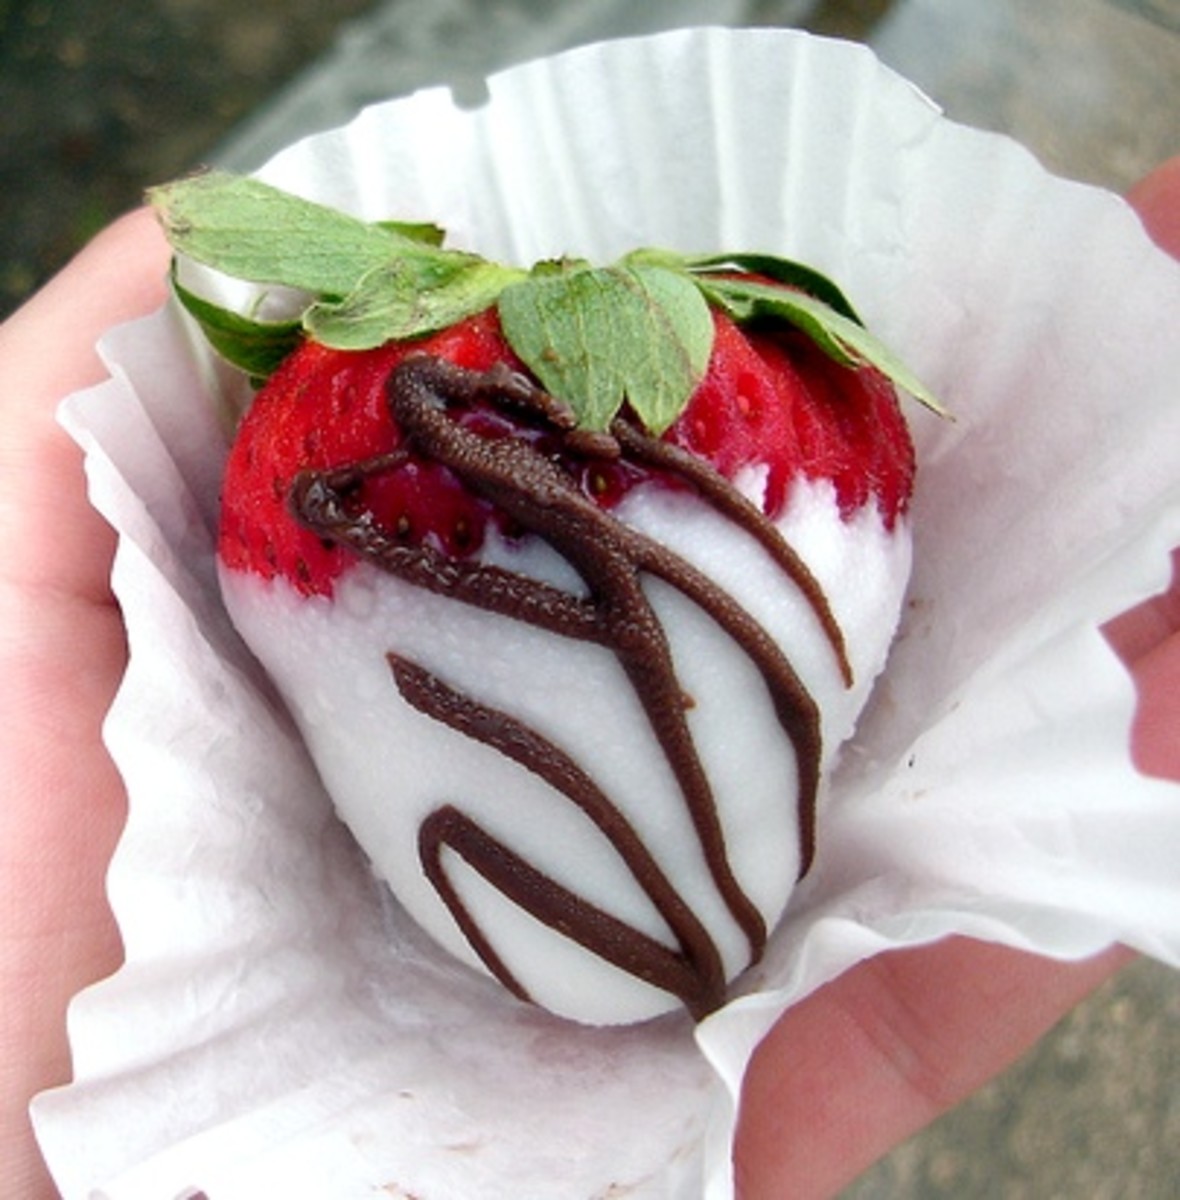 Strawberry dipped in white chocolate and drizzled with milk chocolate.